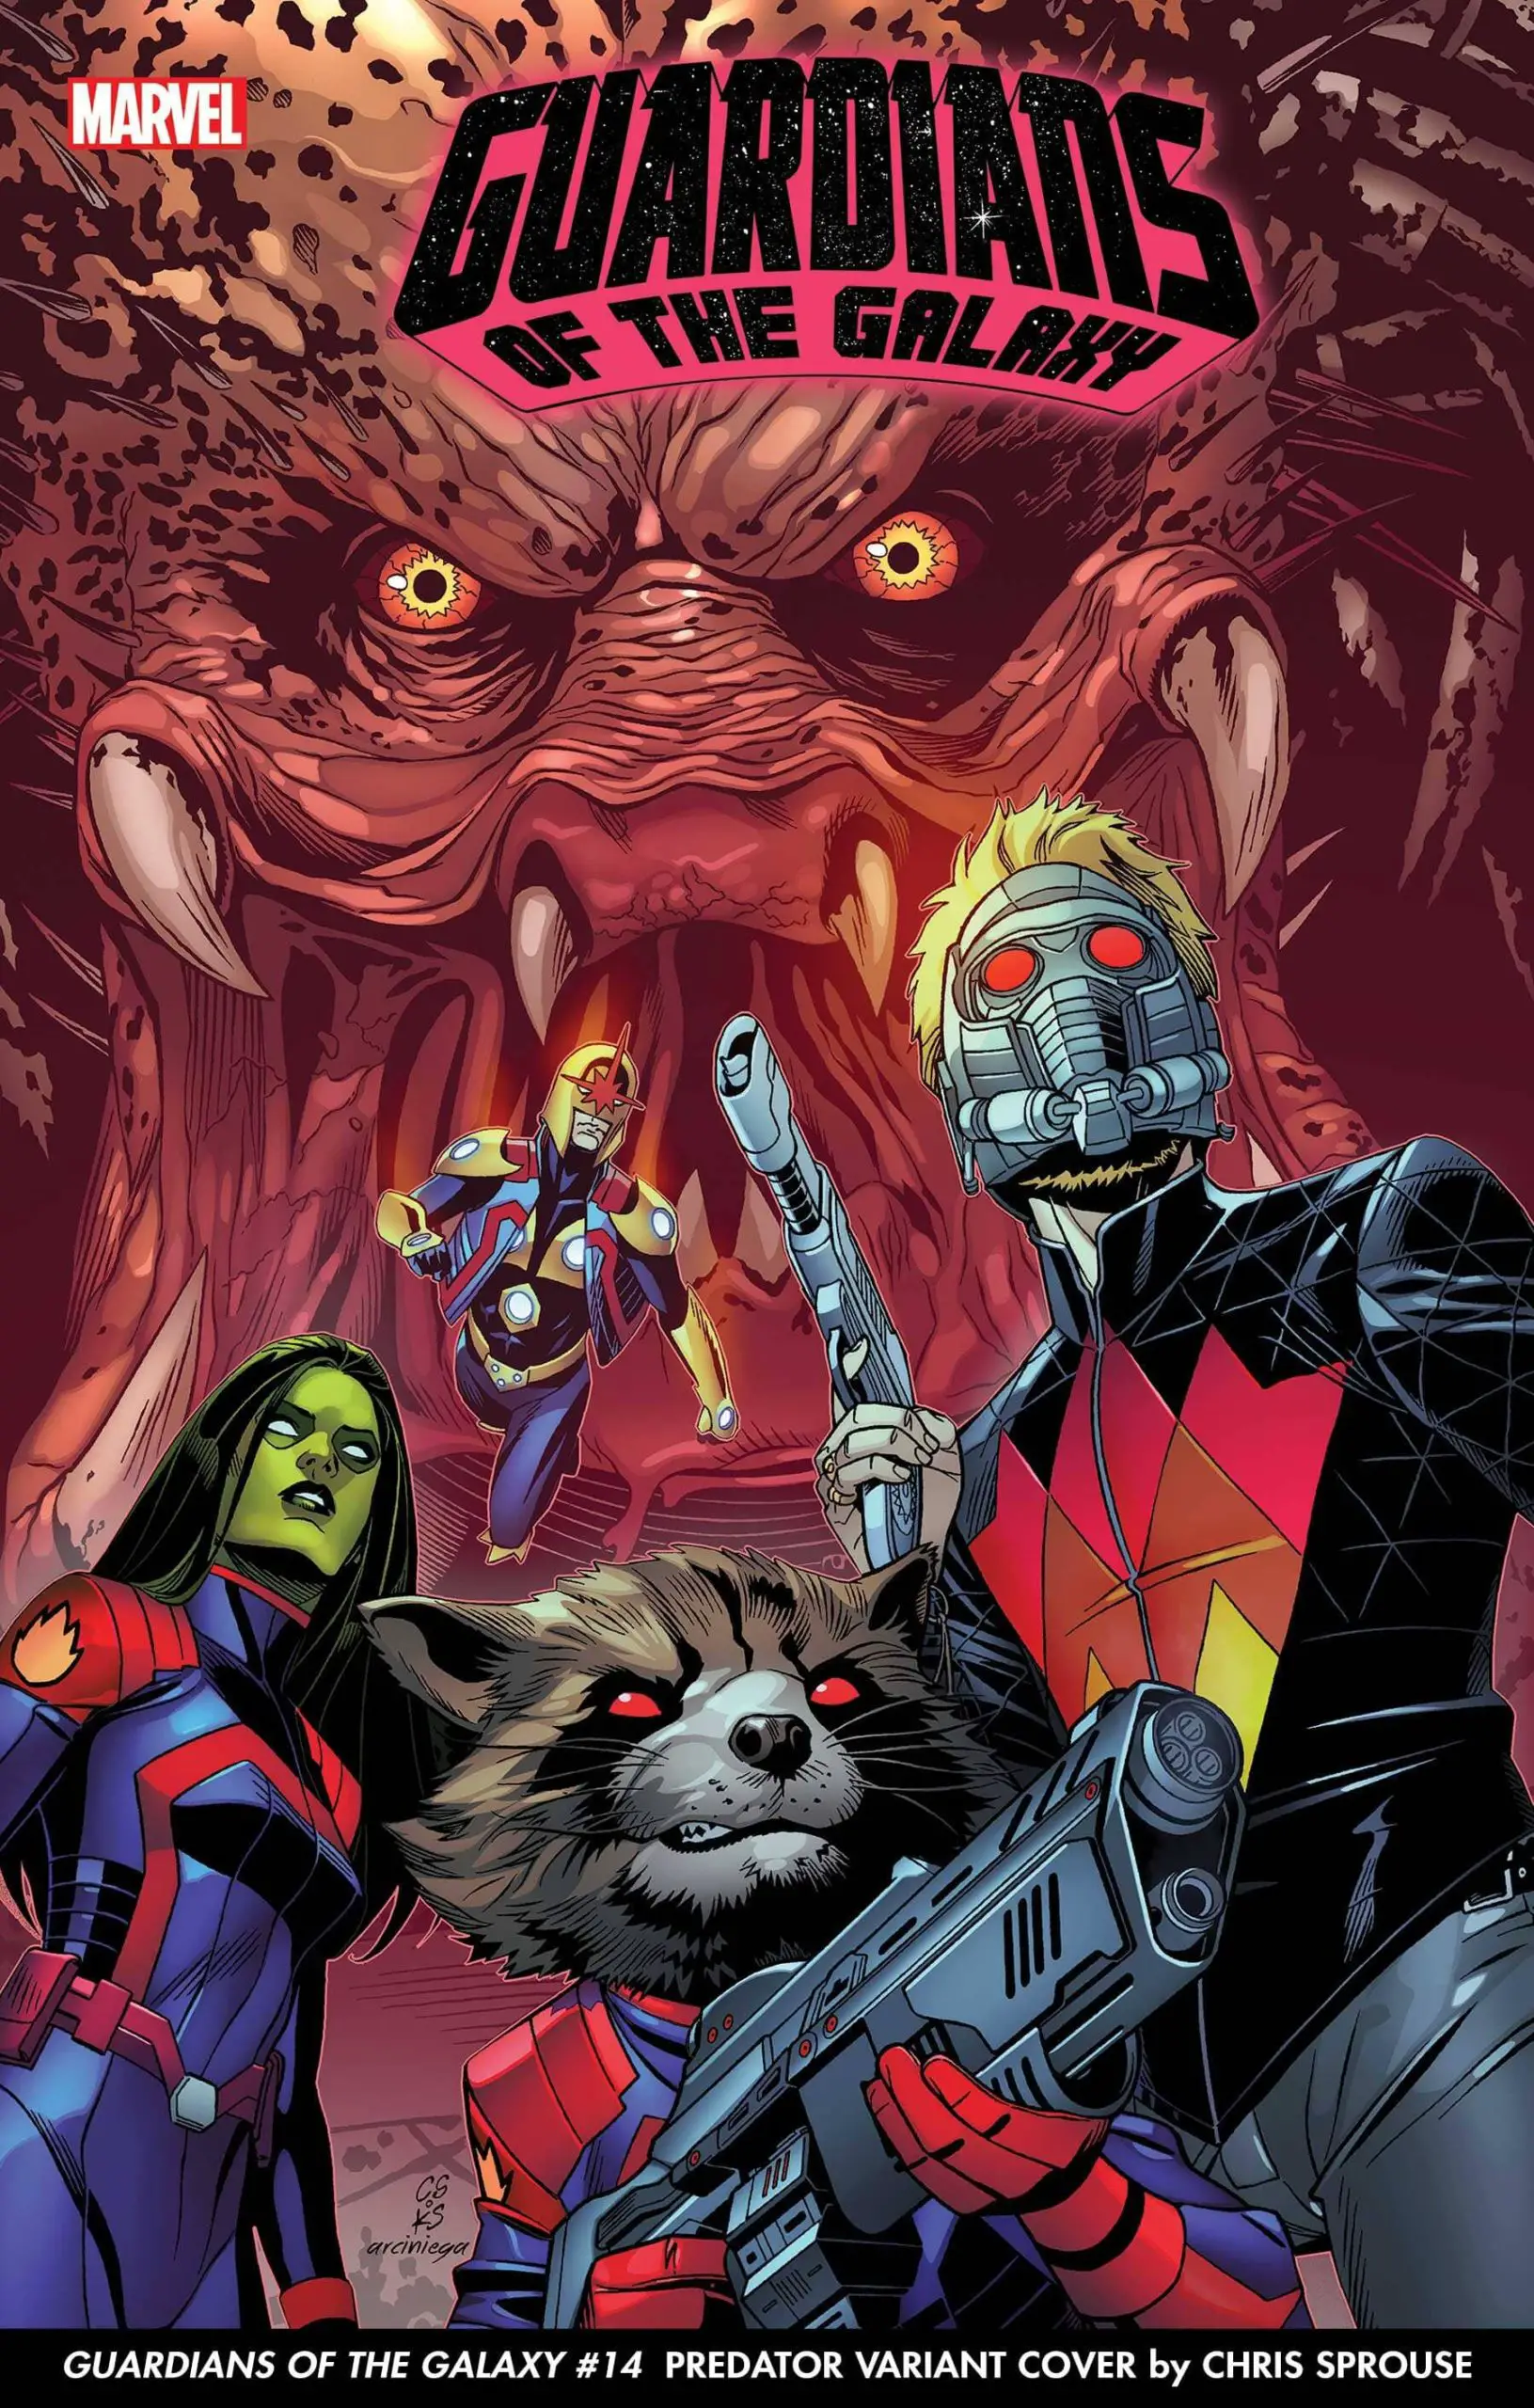 GUARDIANS OF THE GALAXY #14 VARIANT COVER by CHRIS SPROUSE